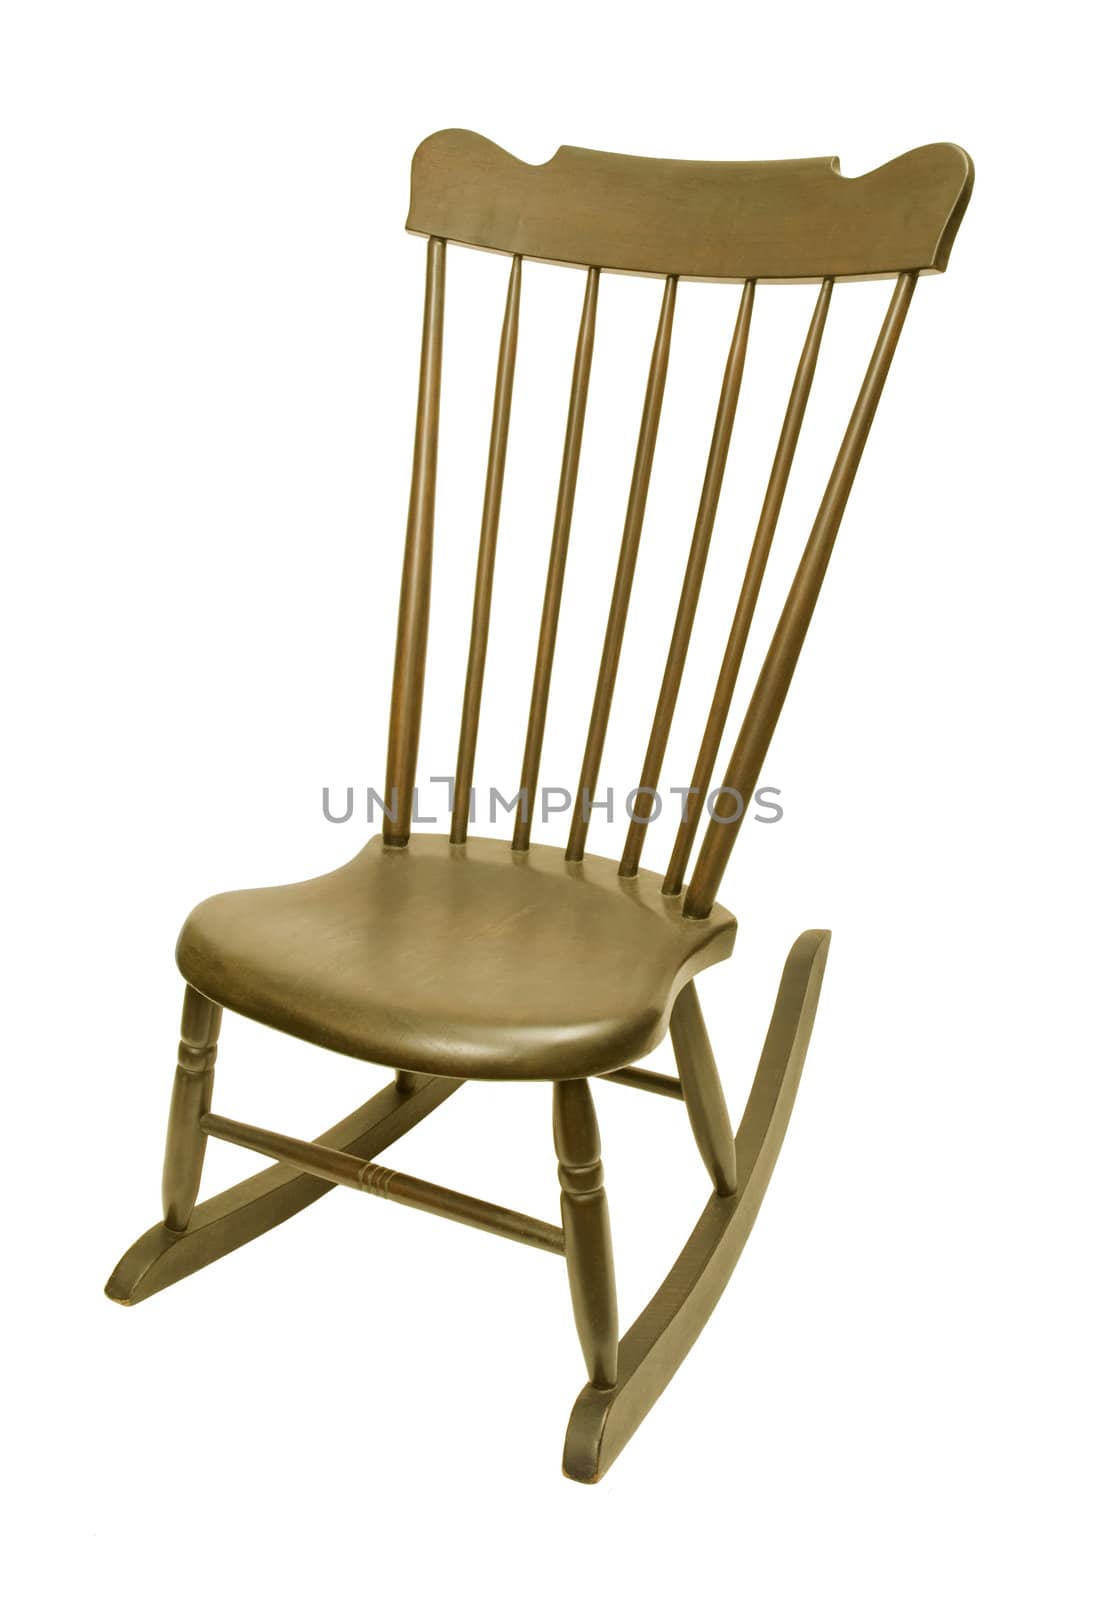 Vintage Antique Rocking Chair by Balefire9